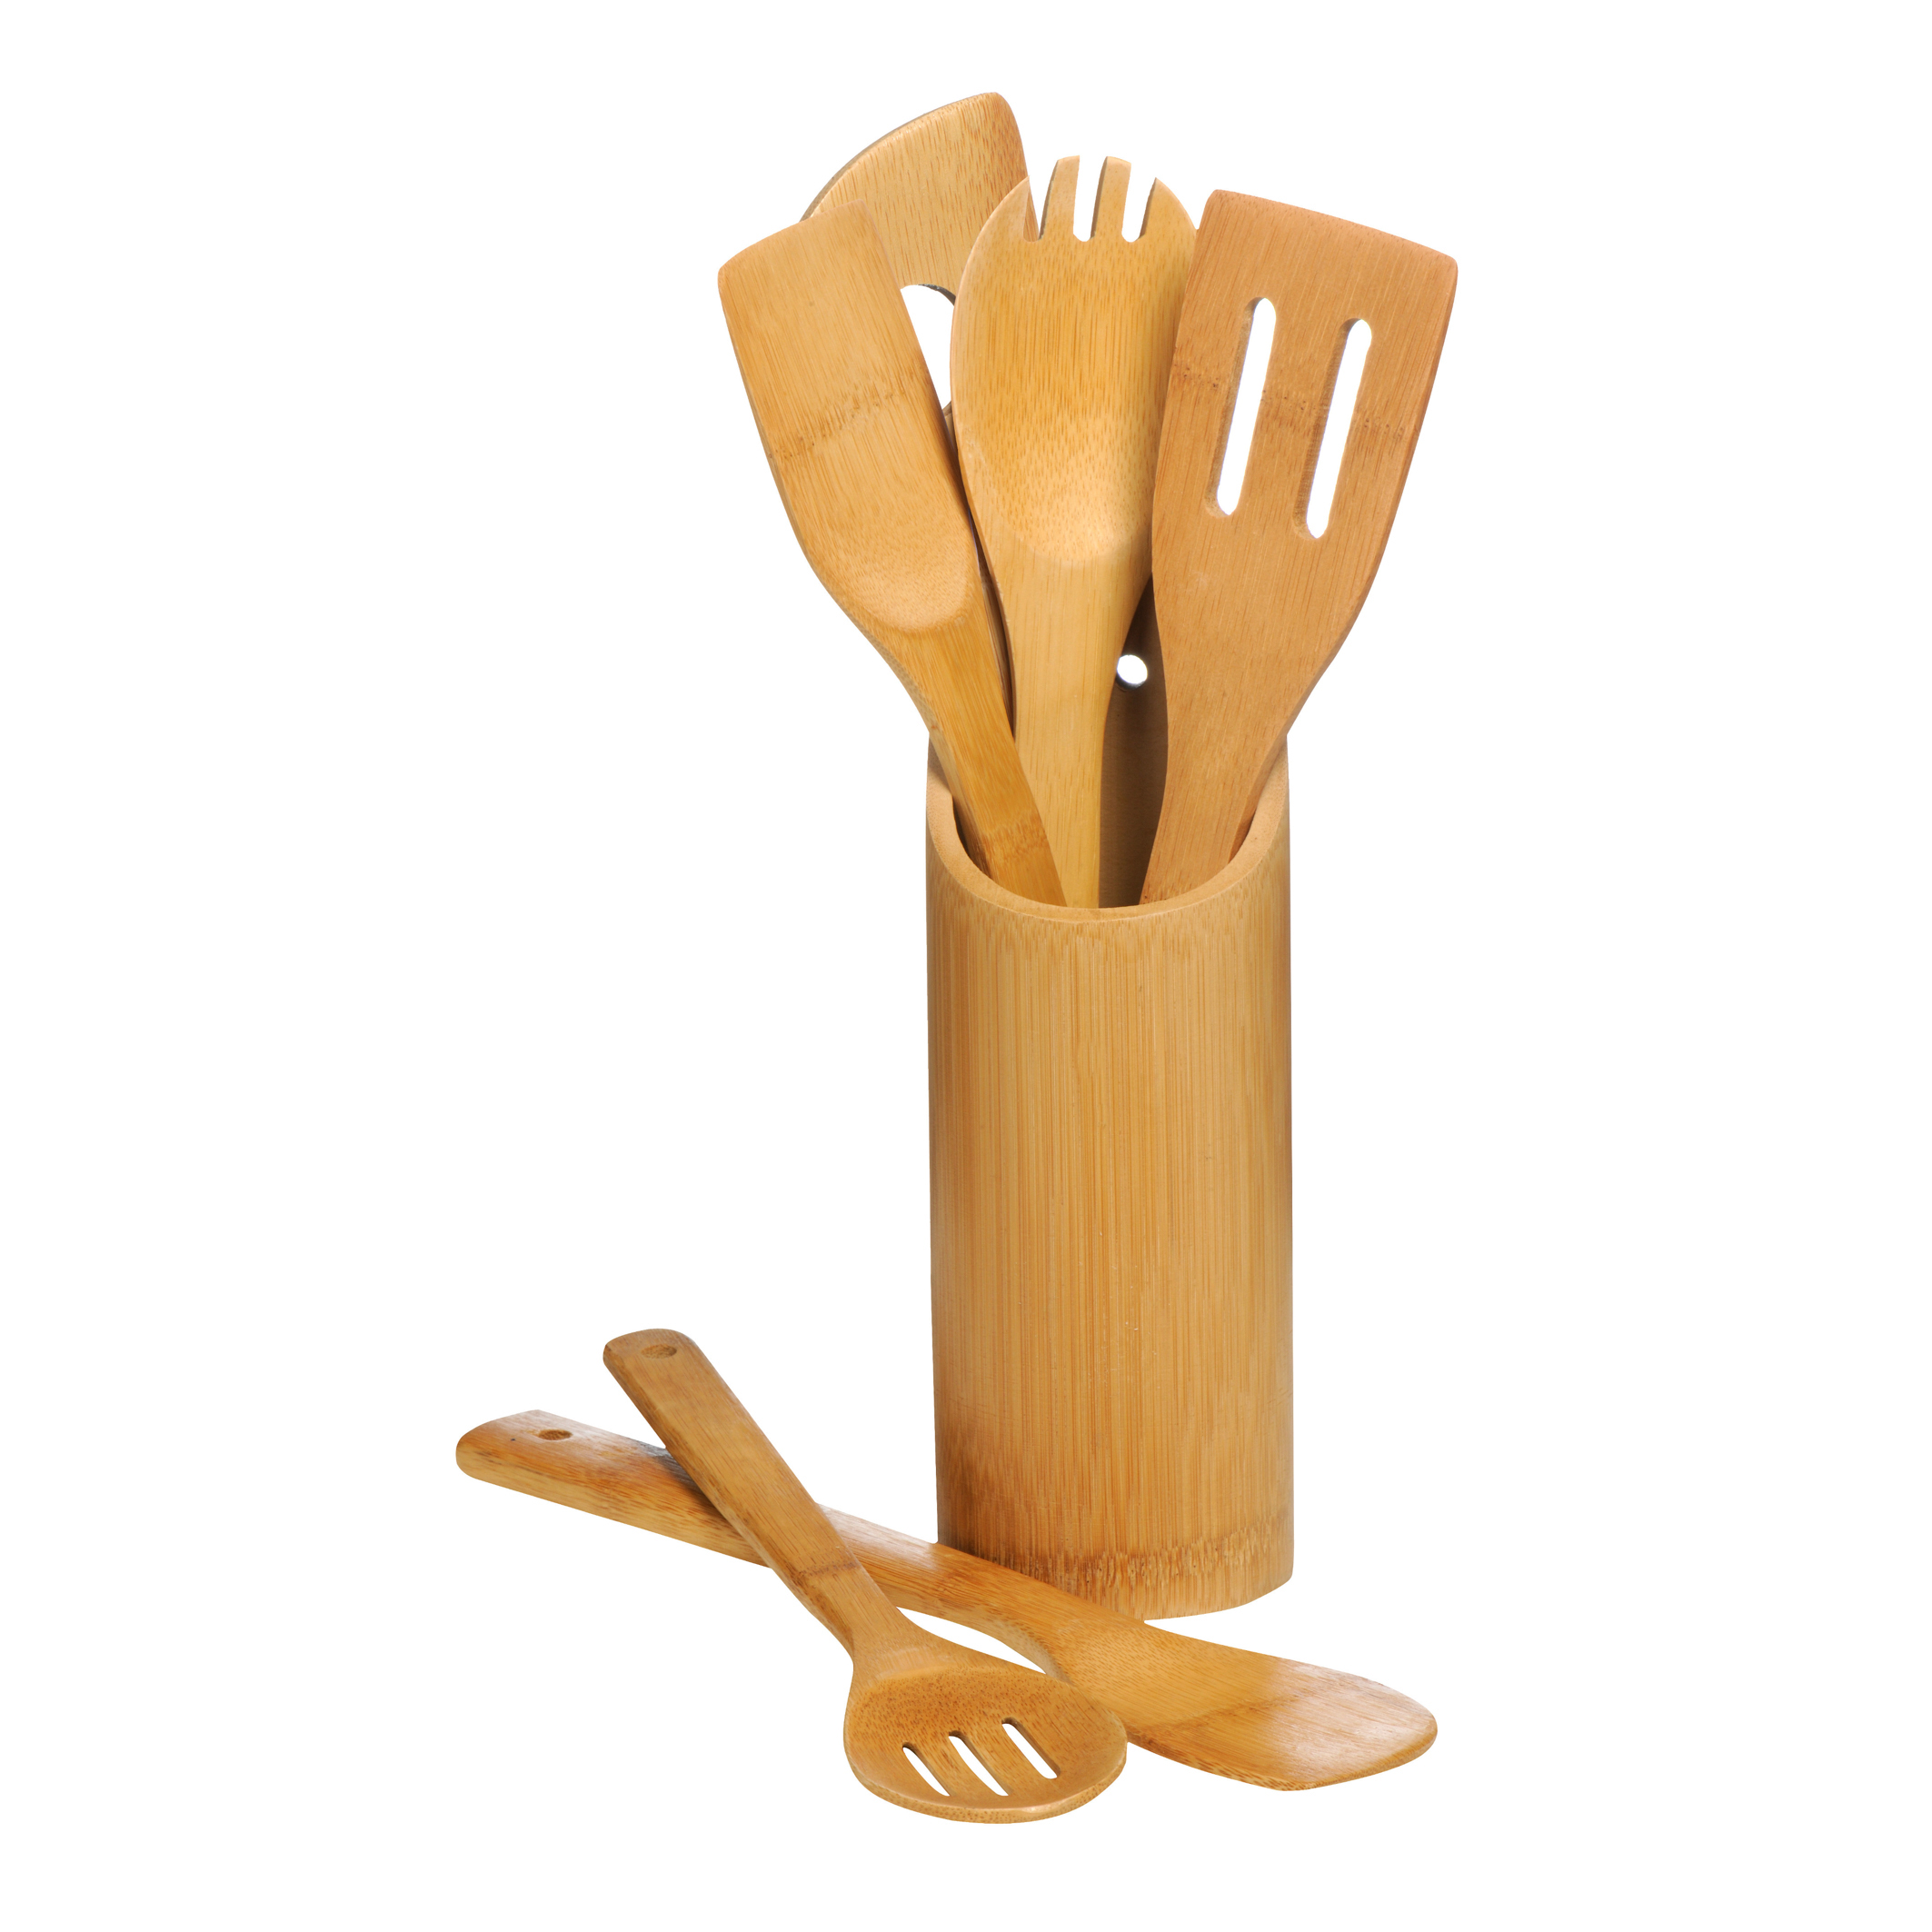 Perfect for Nonstick Pan Cookware VISHTEA Bamboo Cooking & Serving Utensil Set 6 Pieces Bamboo Kitchen Spoon & Spatula Mix Set Utensil Holder Organizer Great Gift for Chefs & Foodies | 